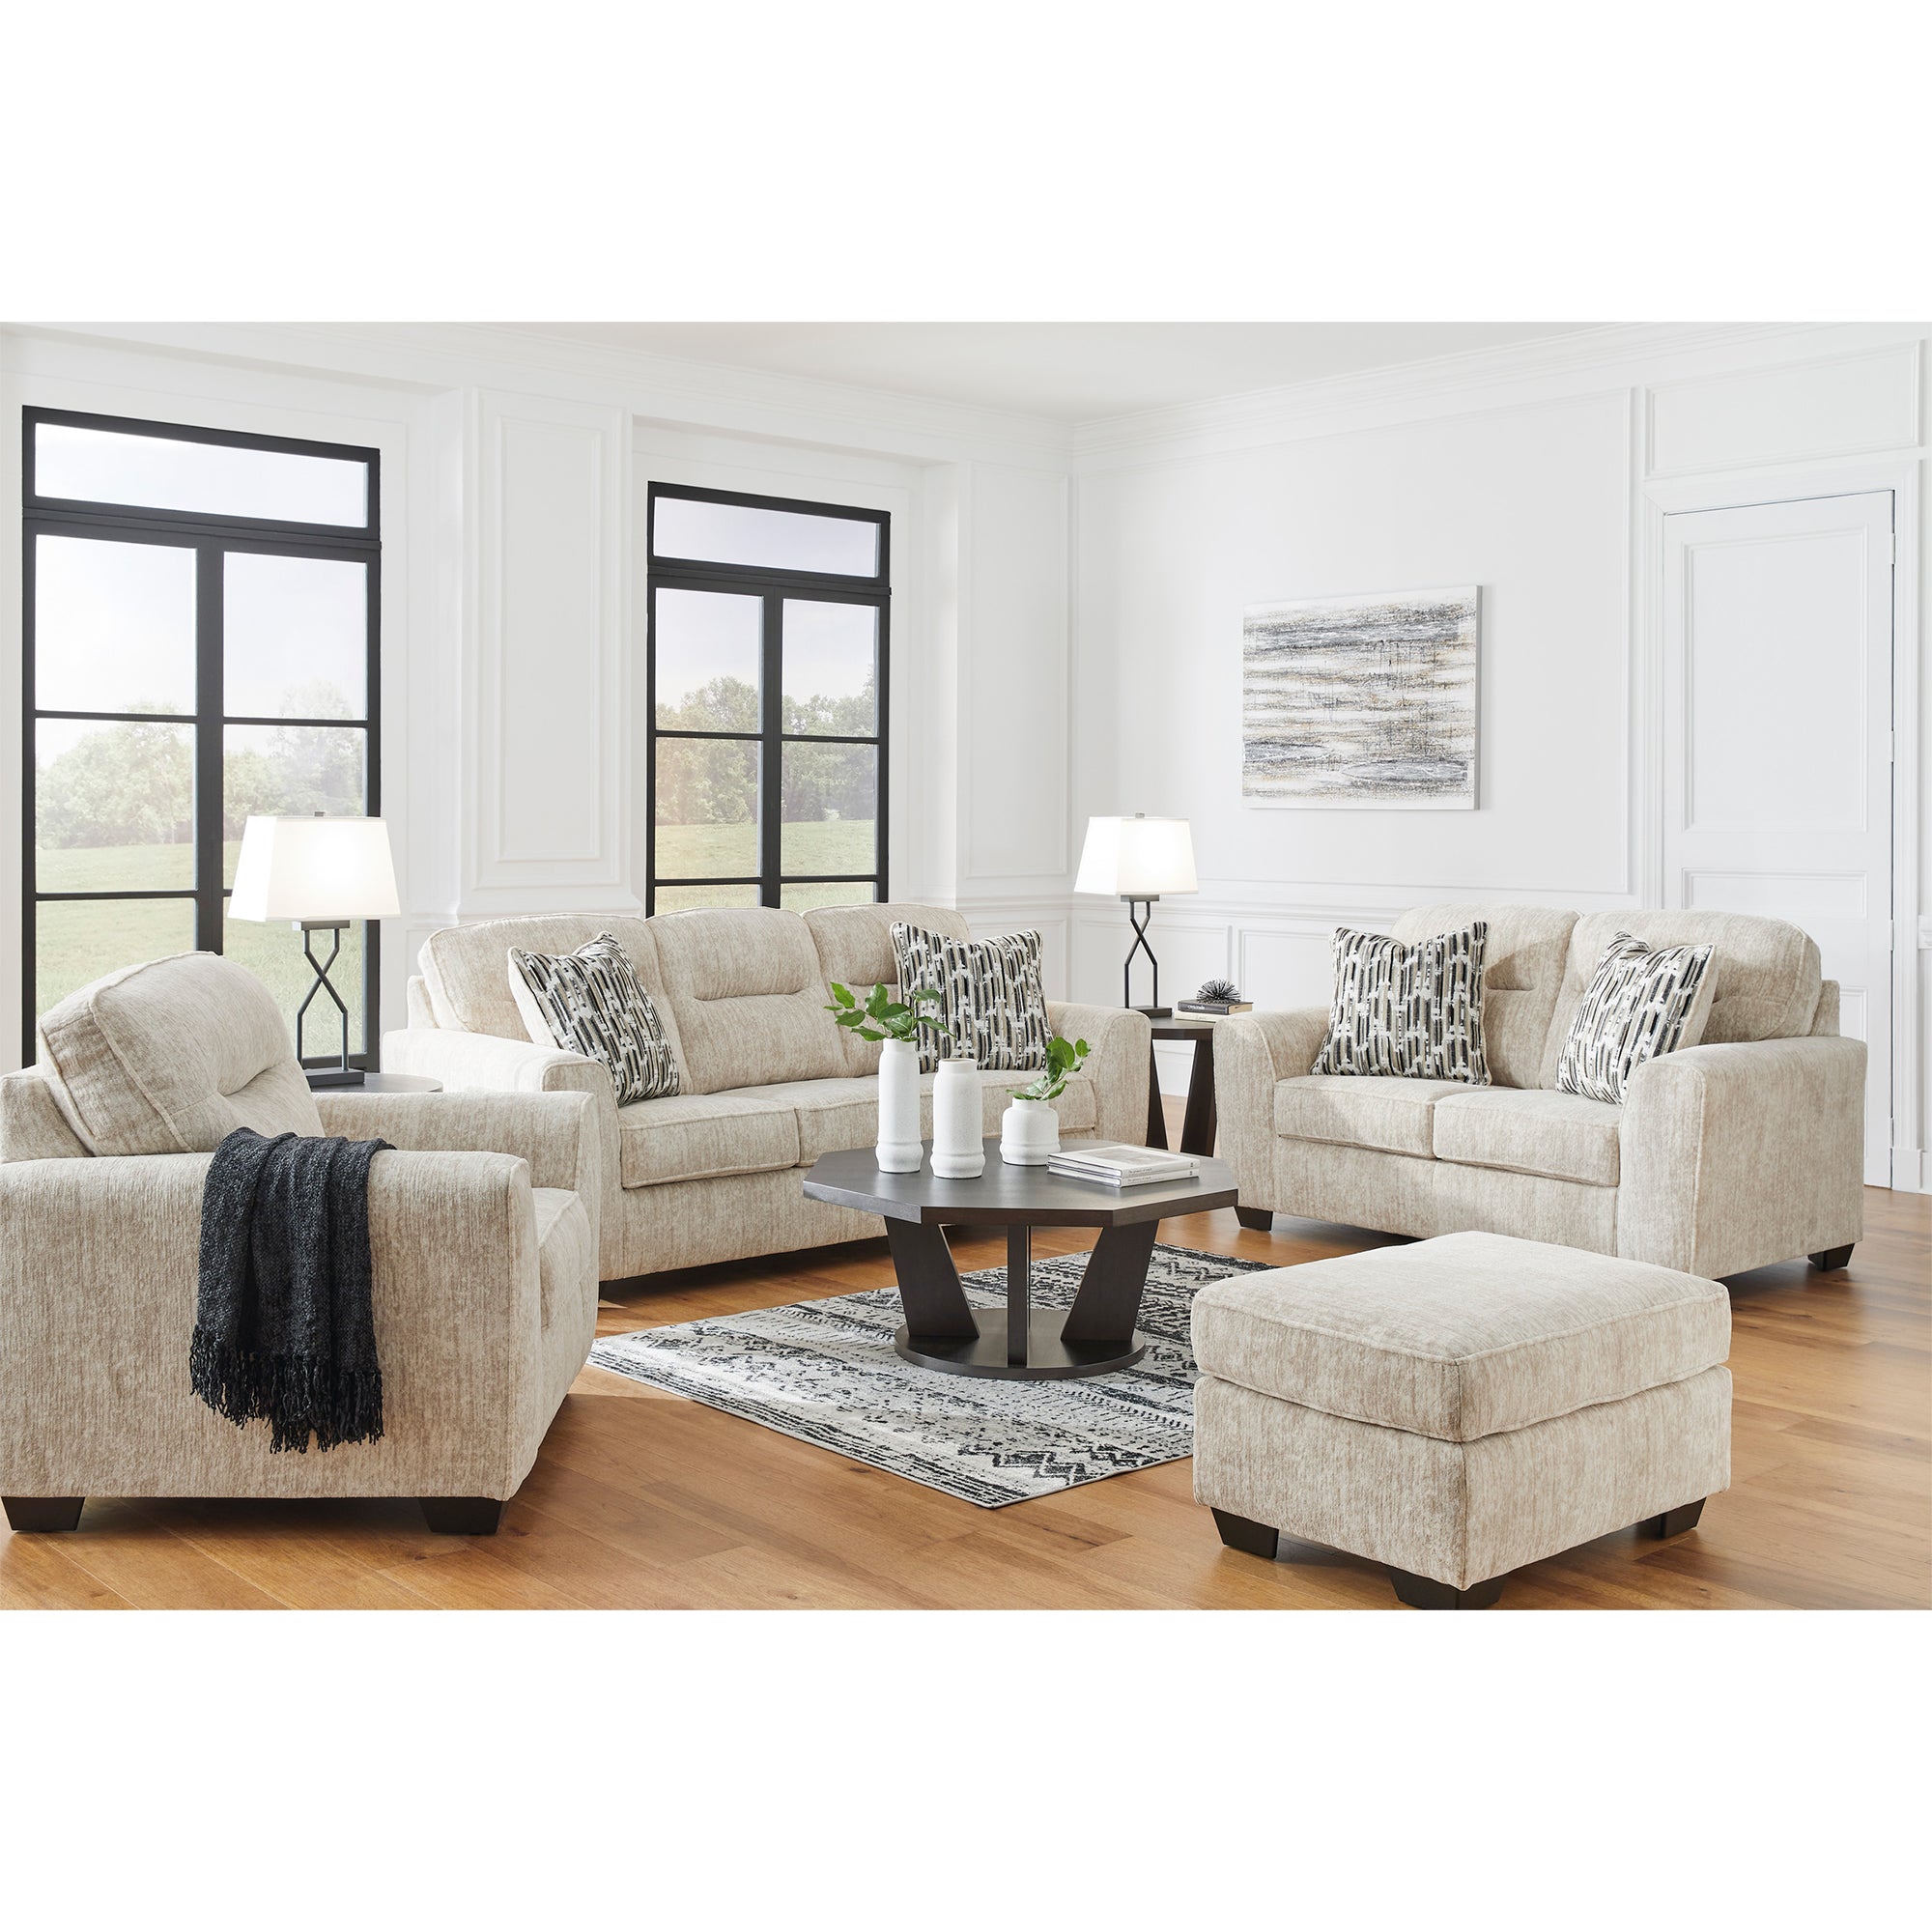 Lonoke Sofa and Loveseat in Parchment Color